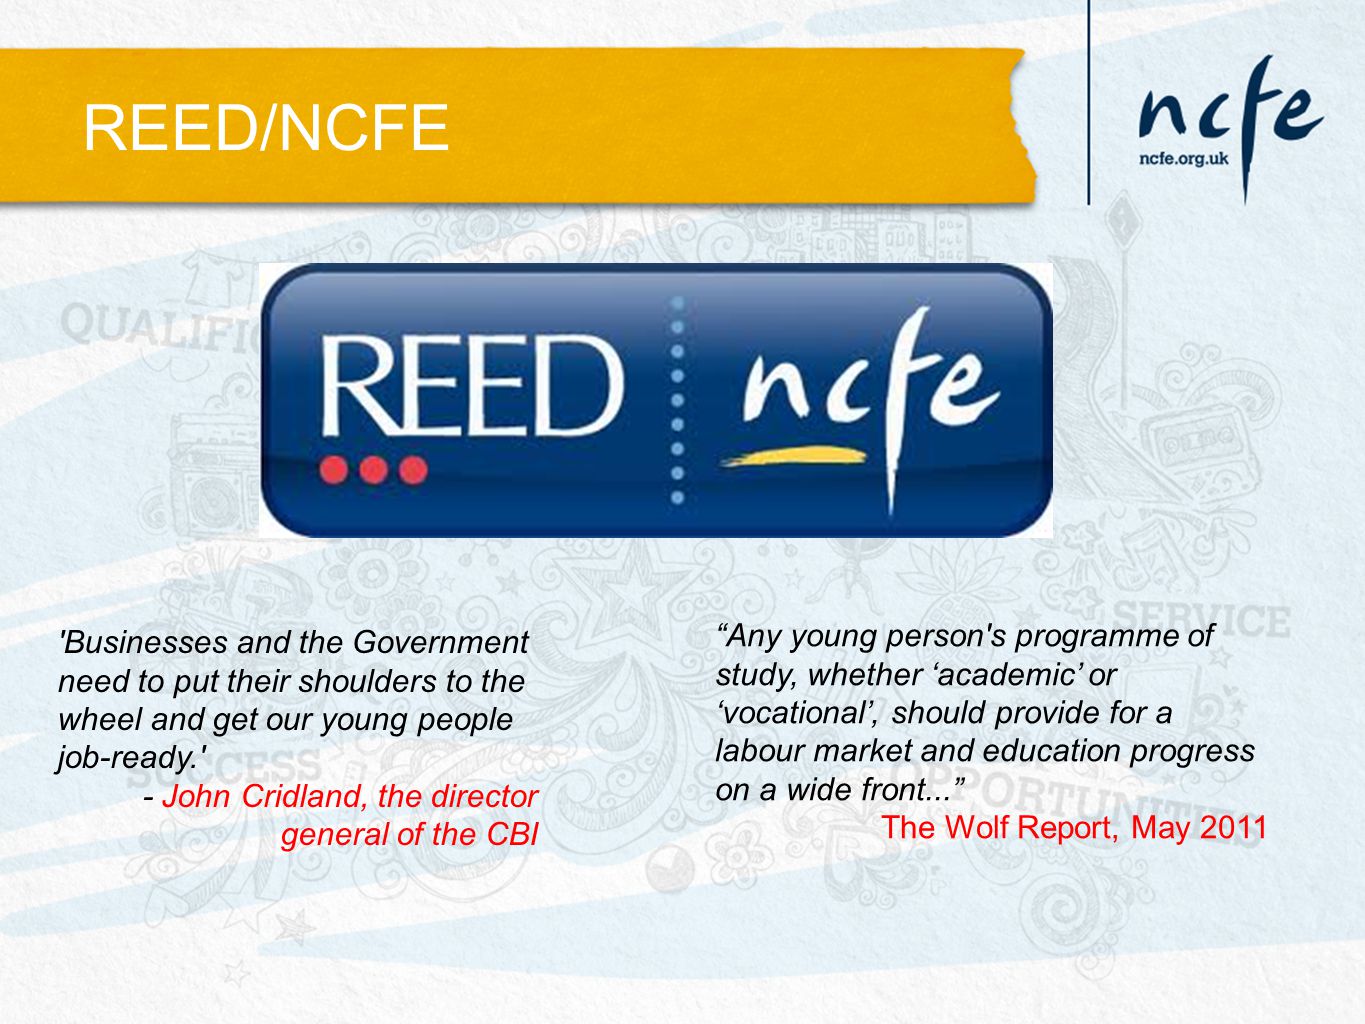 REED/NCFE Any young person s programme of study, whether ‘academic’ or ‘vocational’, should provide for a labour market and education progress on a wide front... The Wolf Report, May 2011 Businesses and the Government need to put their shoulders to the wheel and get our young people job-ready. - John Cridland, the director general of the CBI